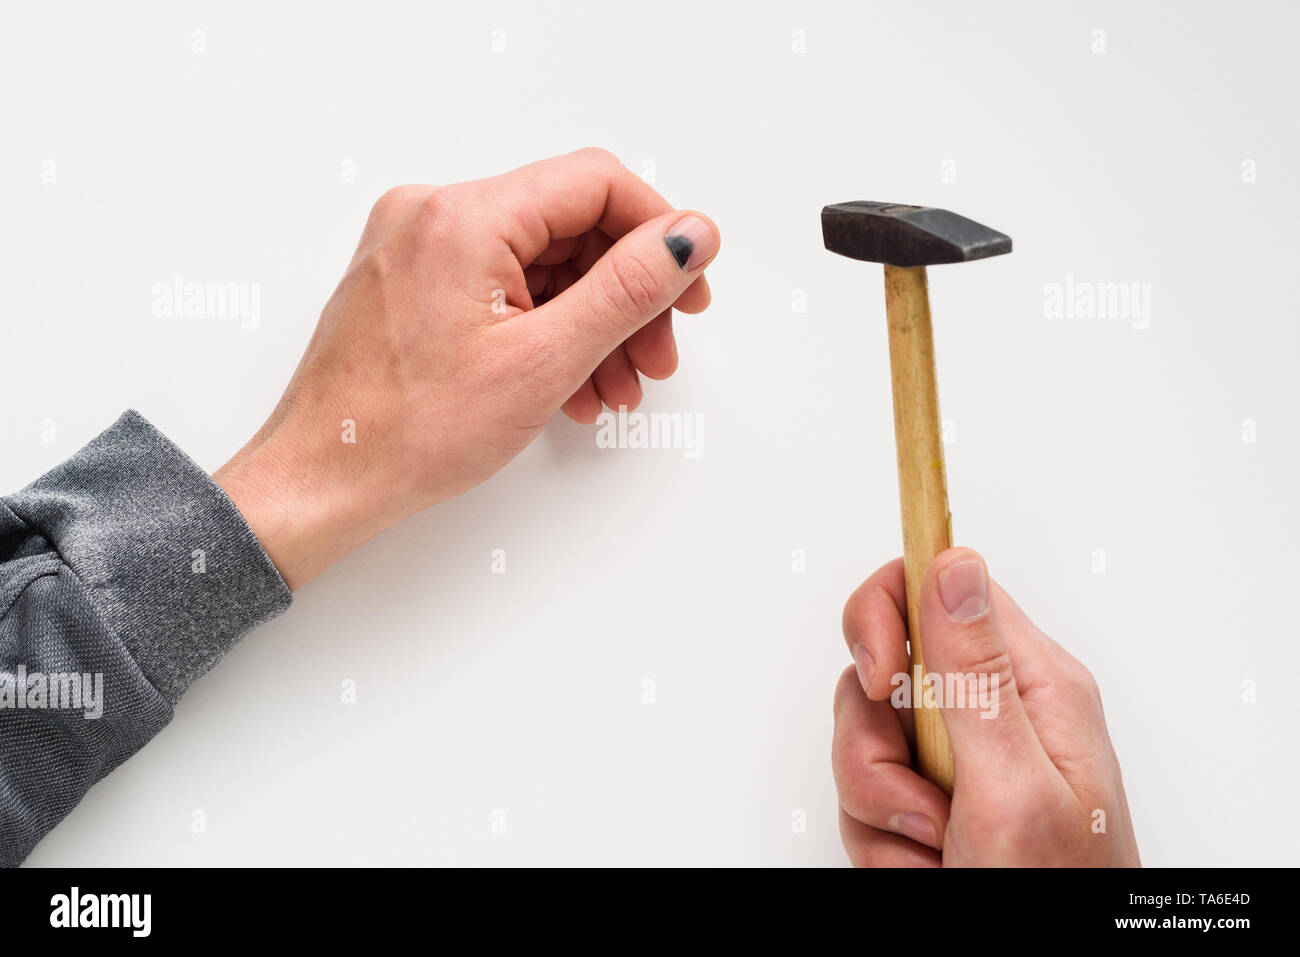 Hammer on the finger. Black thumbnail. Injury in violation of occupational safety. Men hands on white background Stock Photo